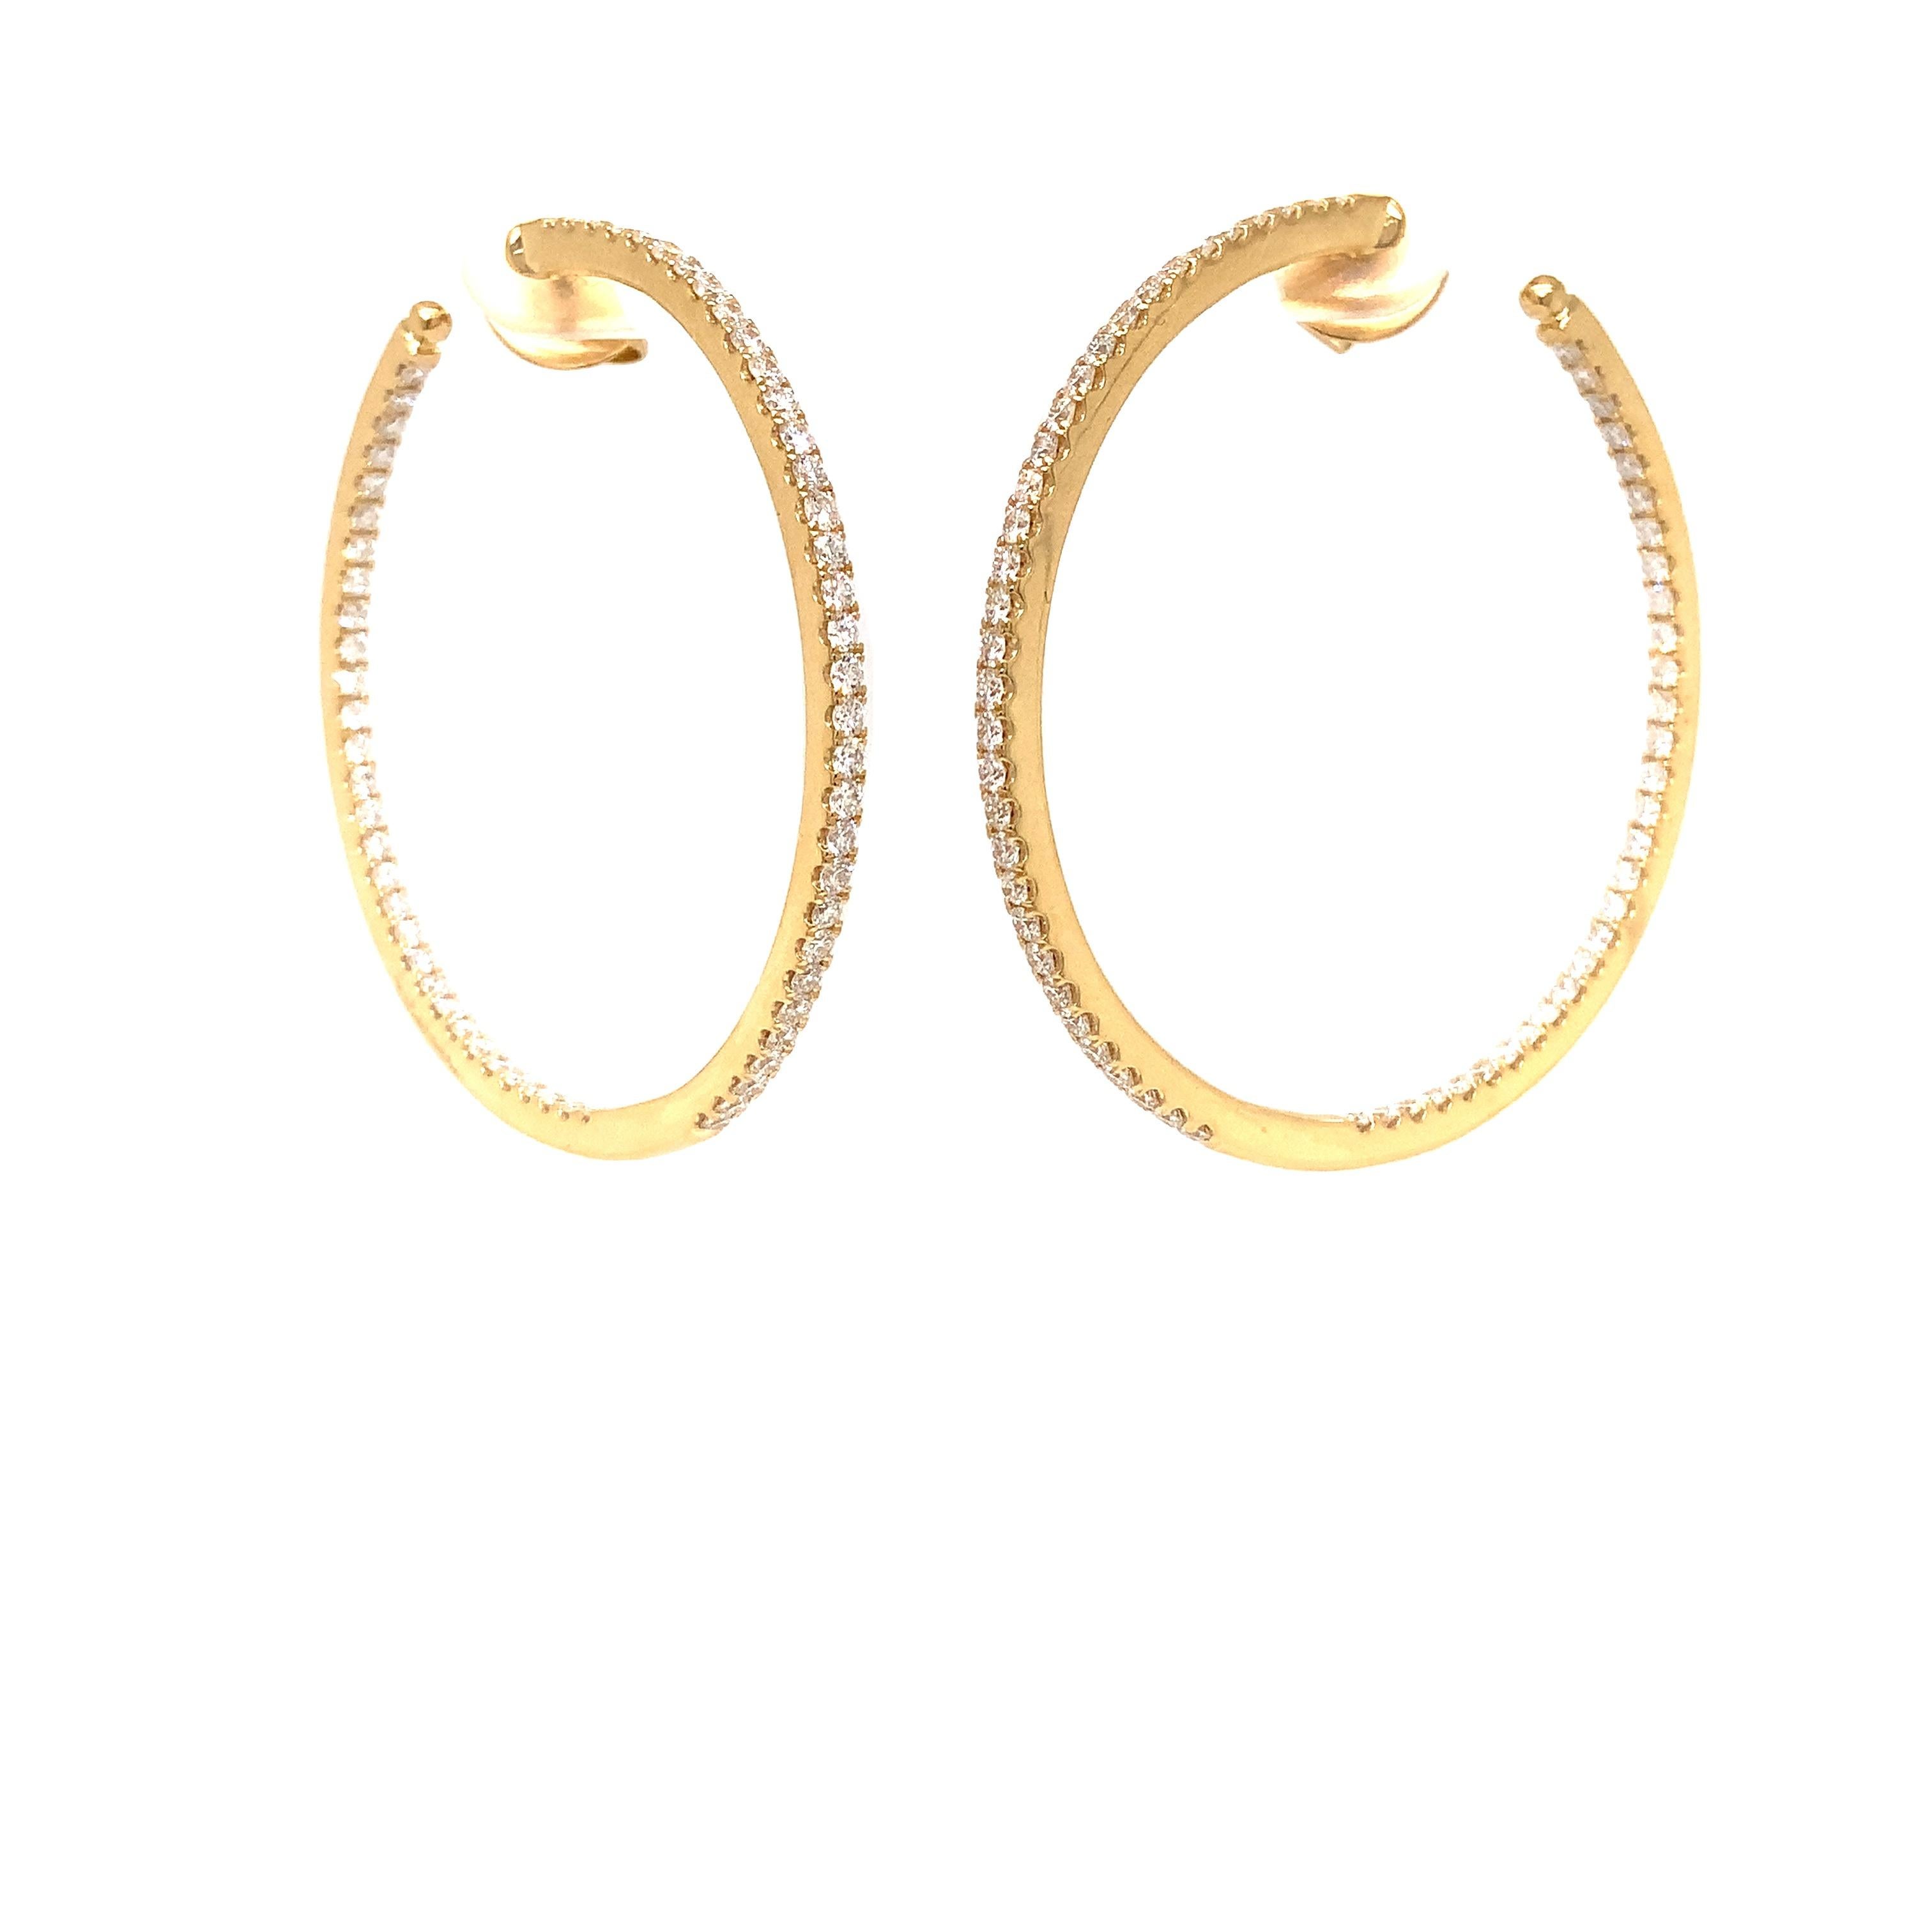 This exquisite Memoire Collection Round Shared Prong Diamond Hoop Set is artfully crafted in 18K Yellow Gold and features a post with a clutch back. Boasting 126 round diamonds, this set is weighty at 14.2 grams and measures 43mm in diameter. Its